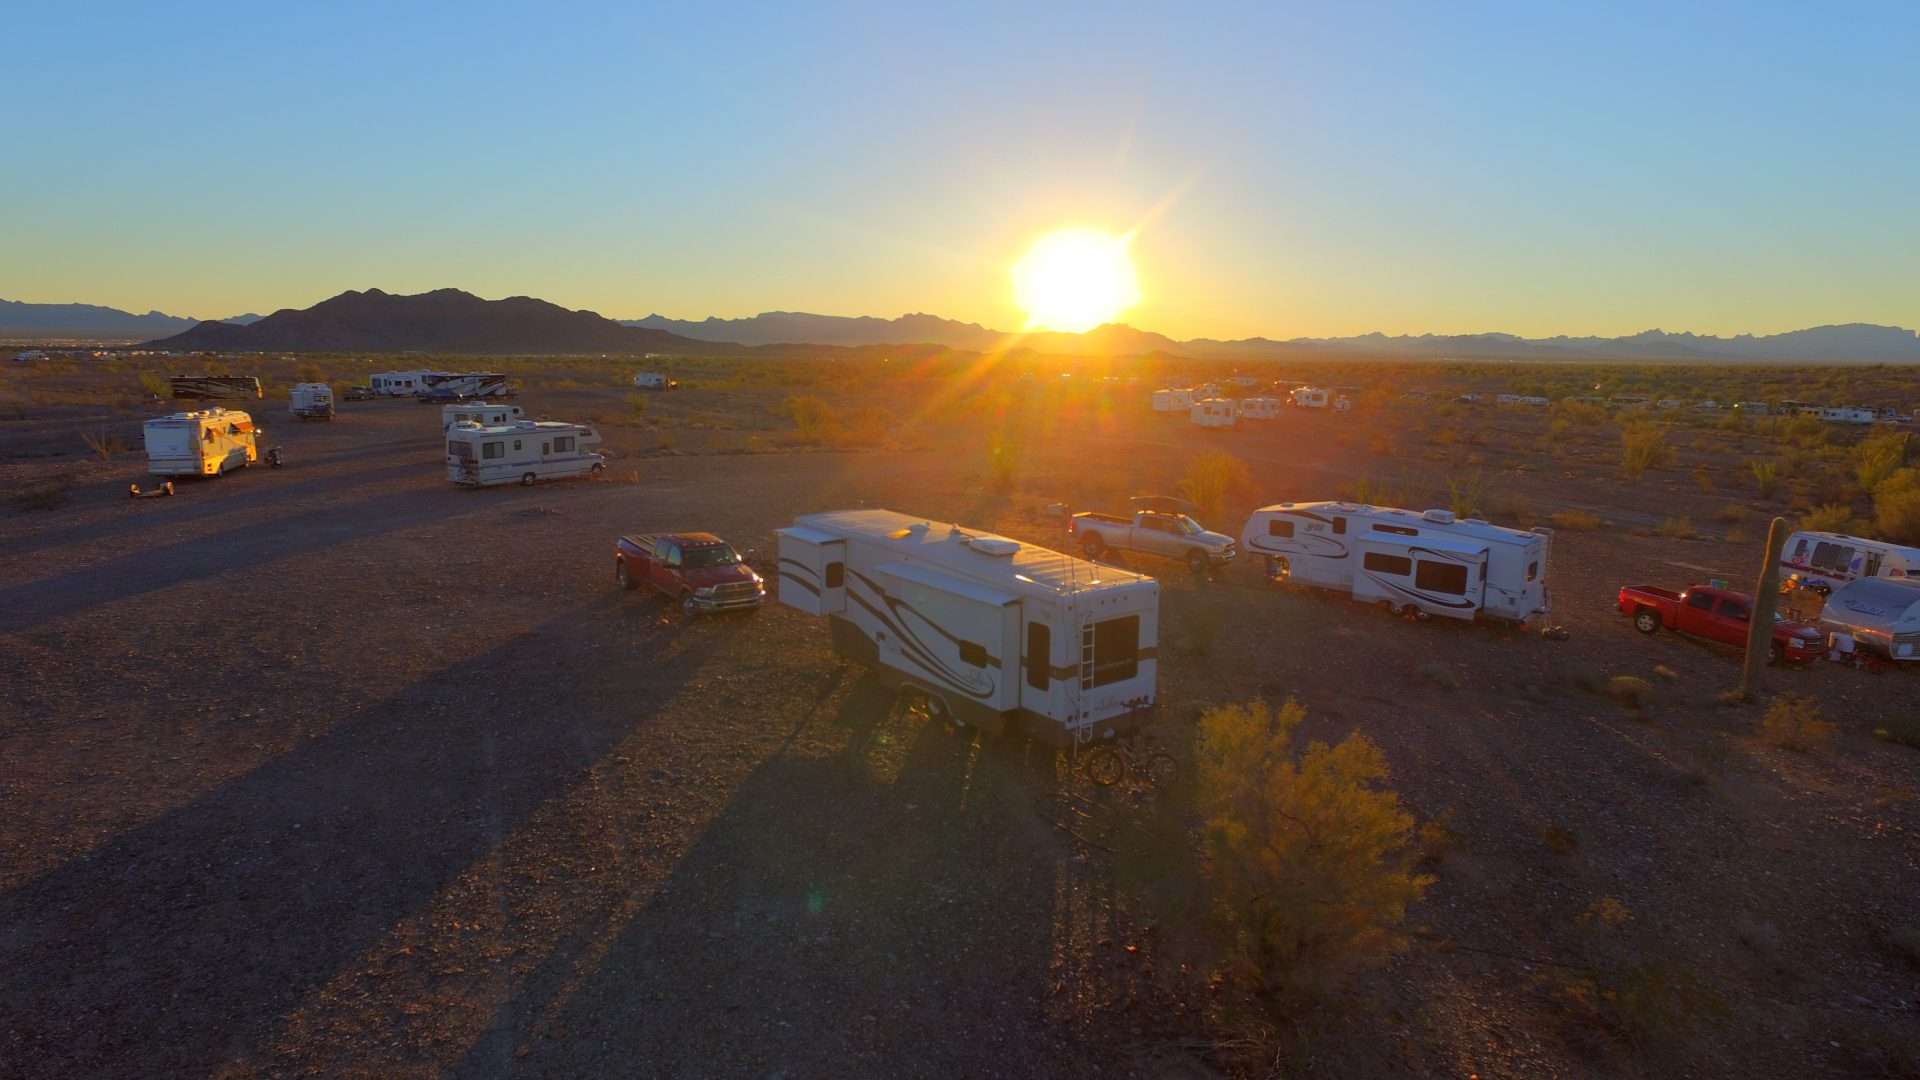 RVs boondocking together in the desert